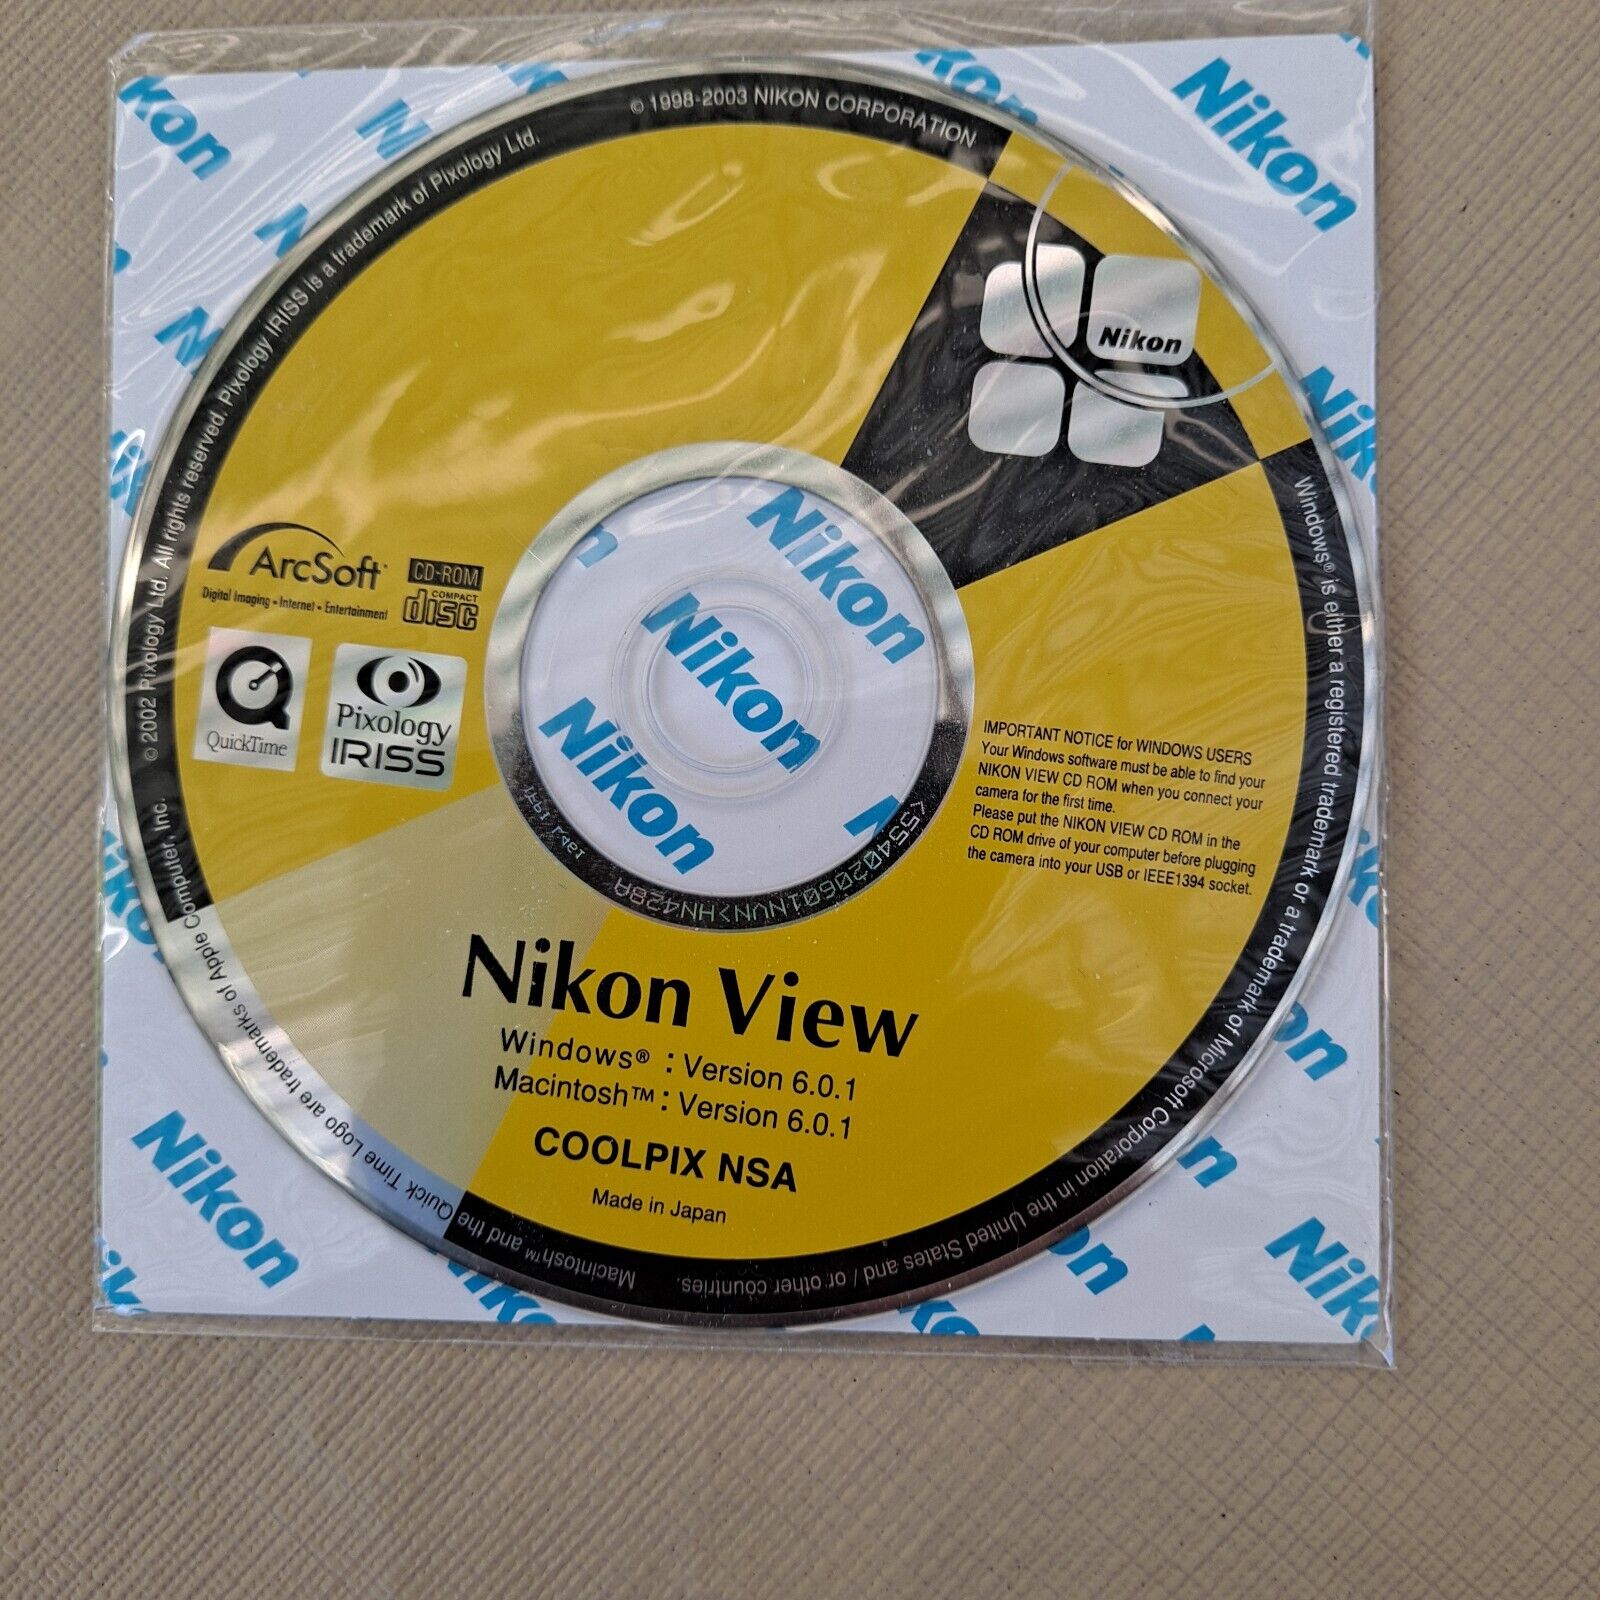 NIKON View 6 Software CD-Rom, Version 6.1 for Mac or Windows, Coolpix NSA 2003